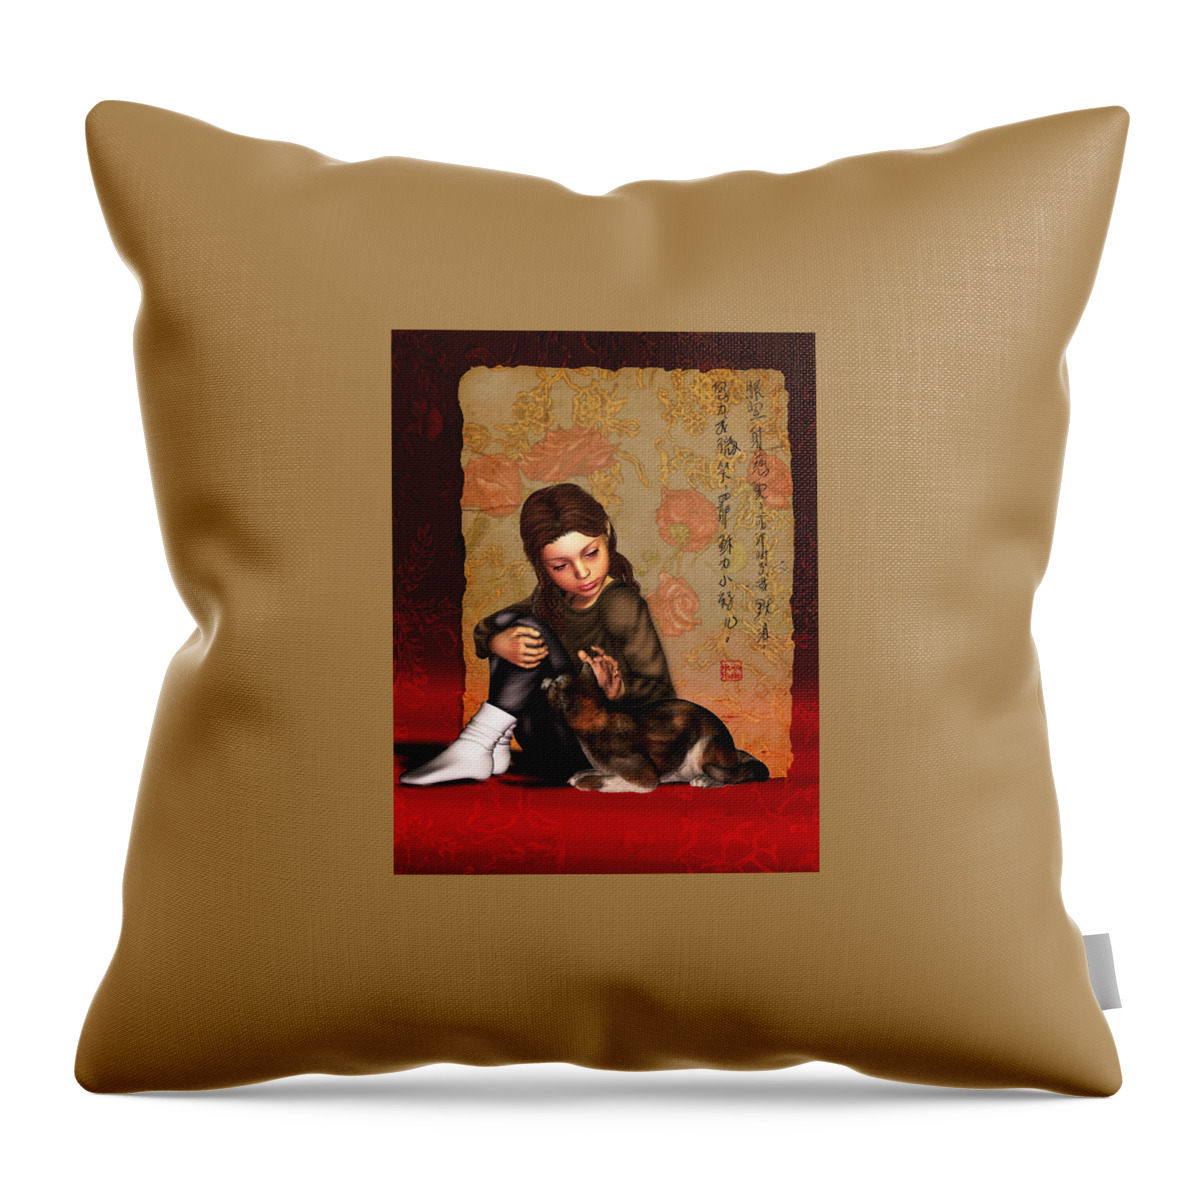 Child Throw Pillow featuring the digital art Jesus To A Child I by Nik Helbig